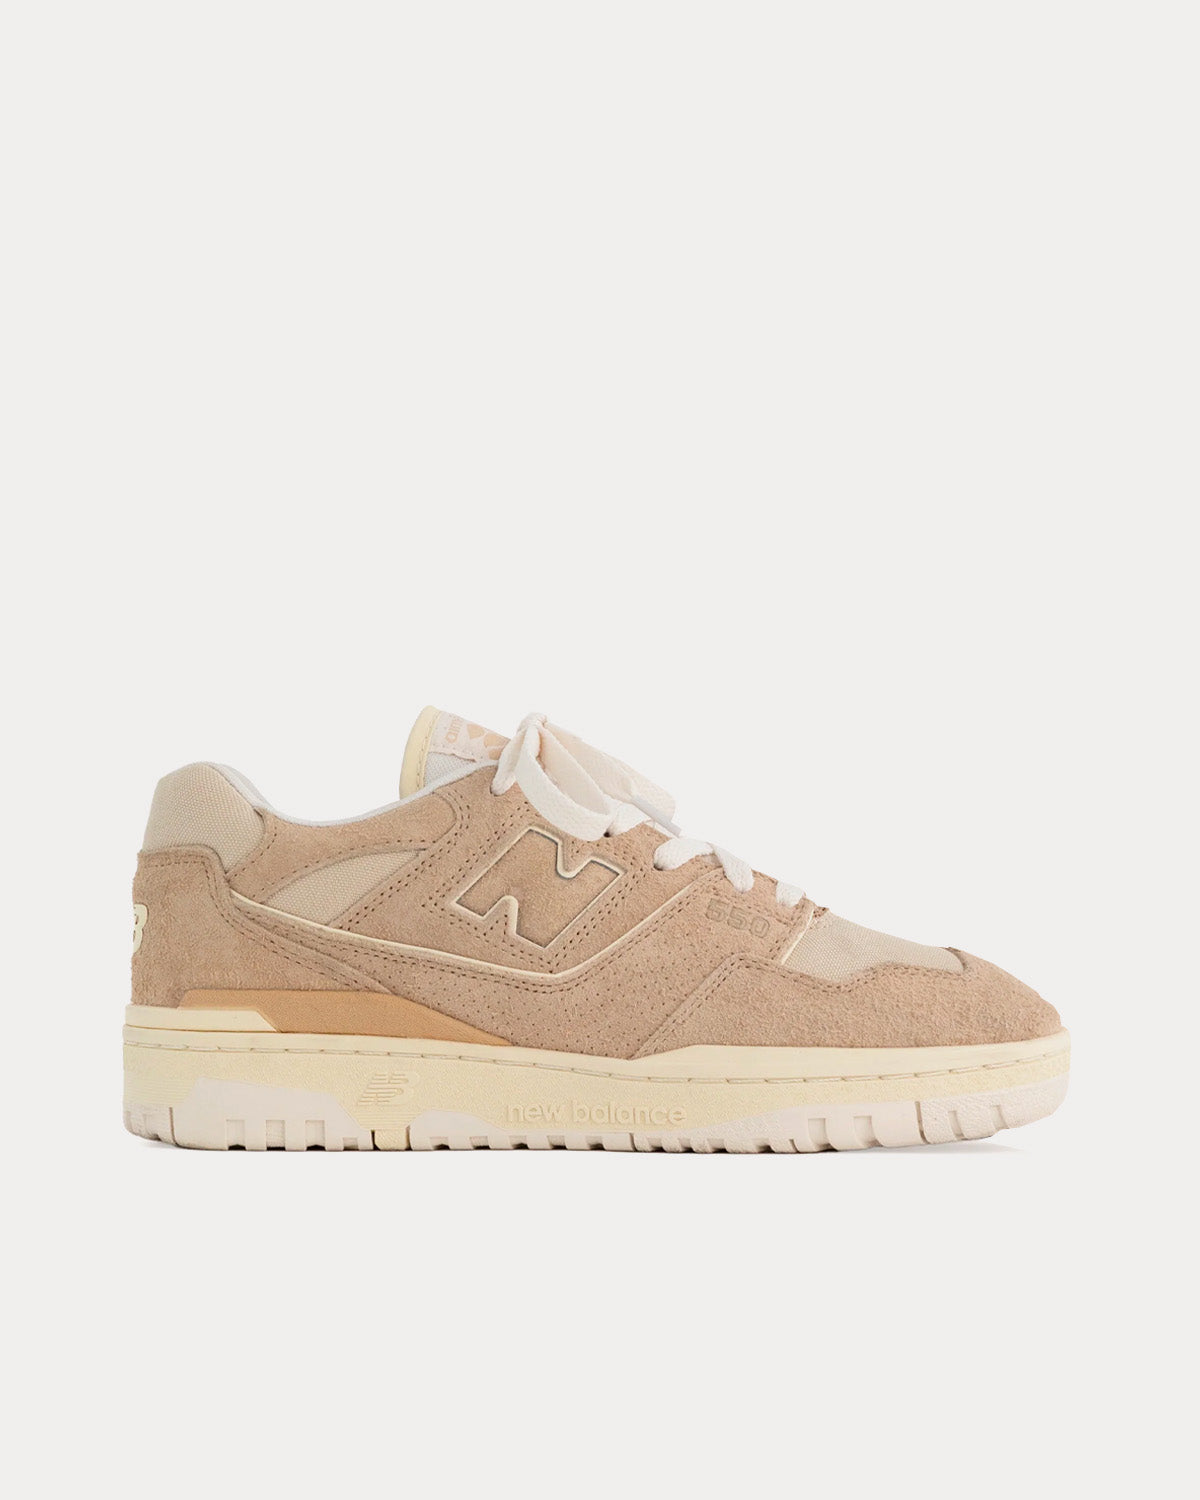 New Balance x Aime Leon Dore - P550 Basketball Oxfords Taupe Low Top Sneakers